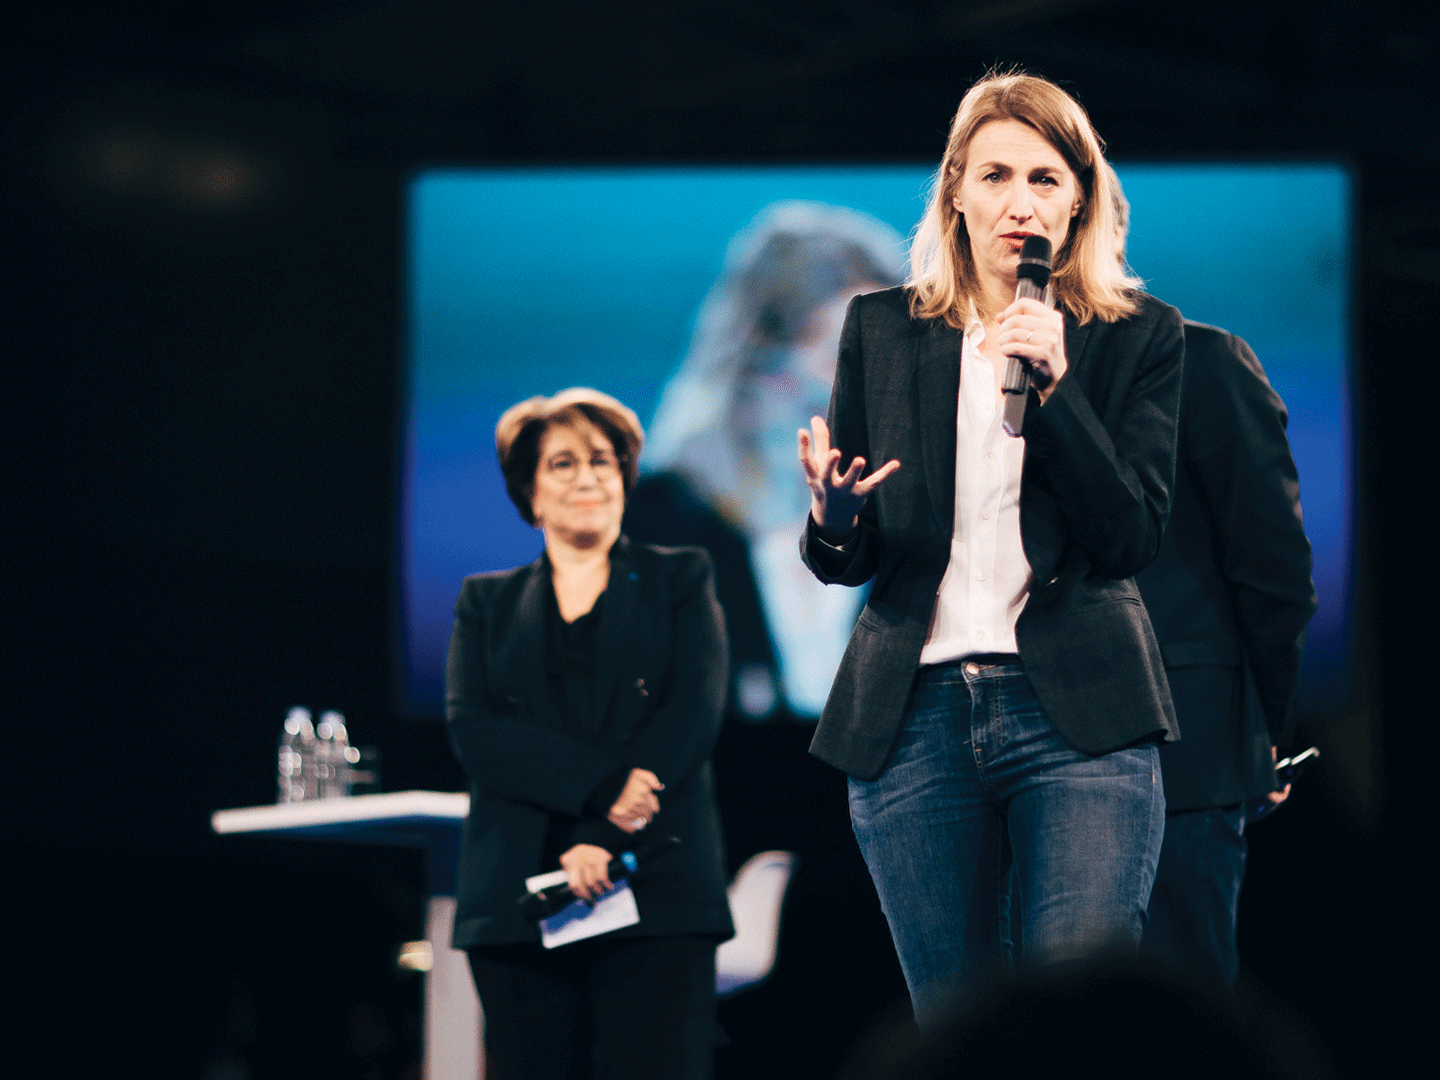 A woman stands and addresses the audience during a speech.